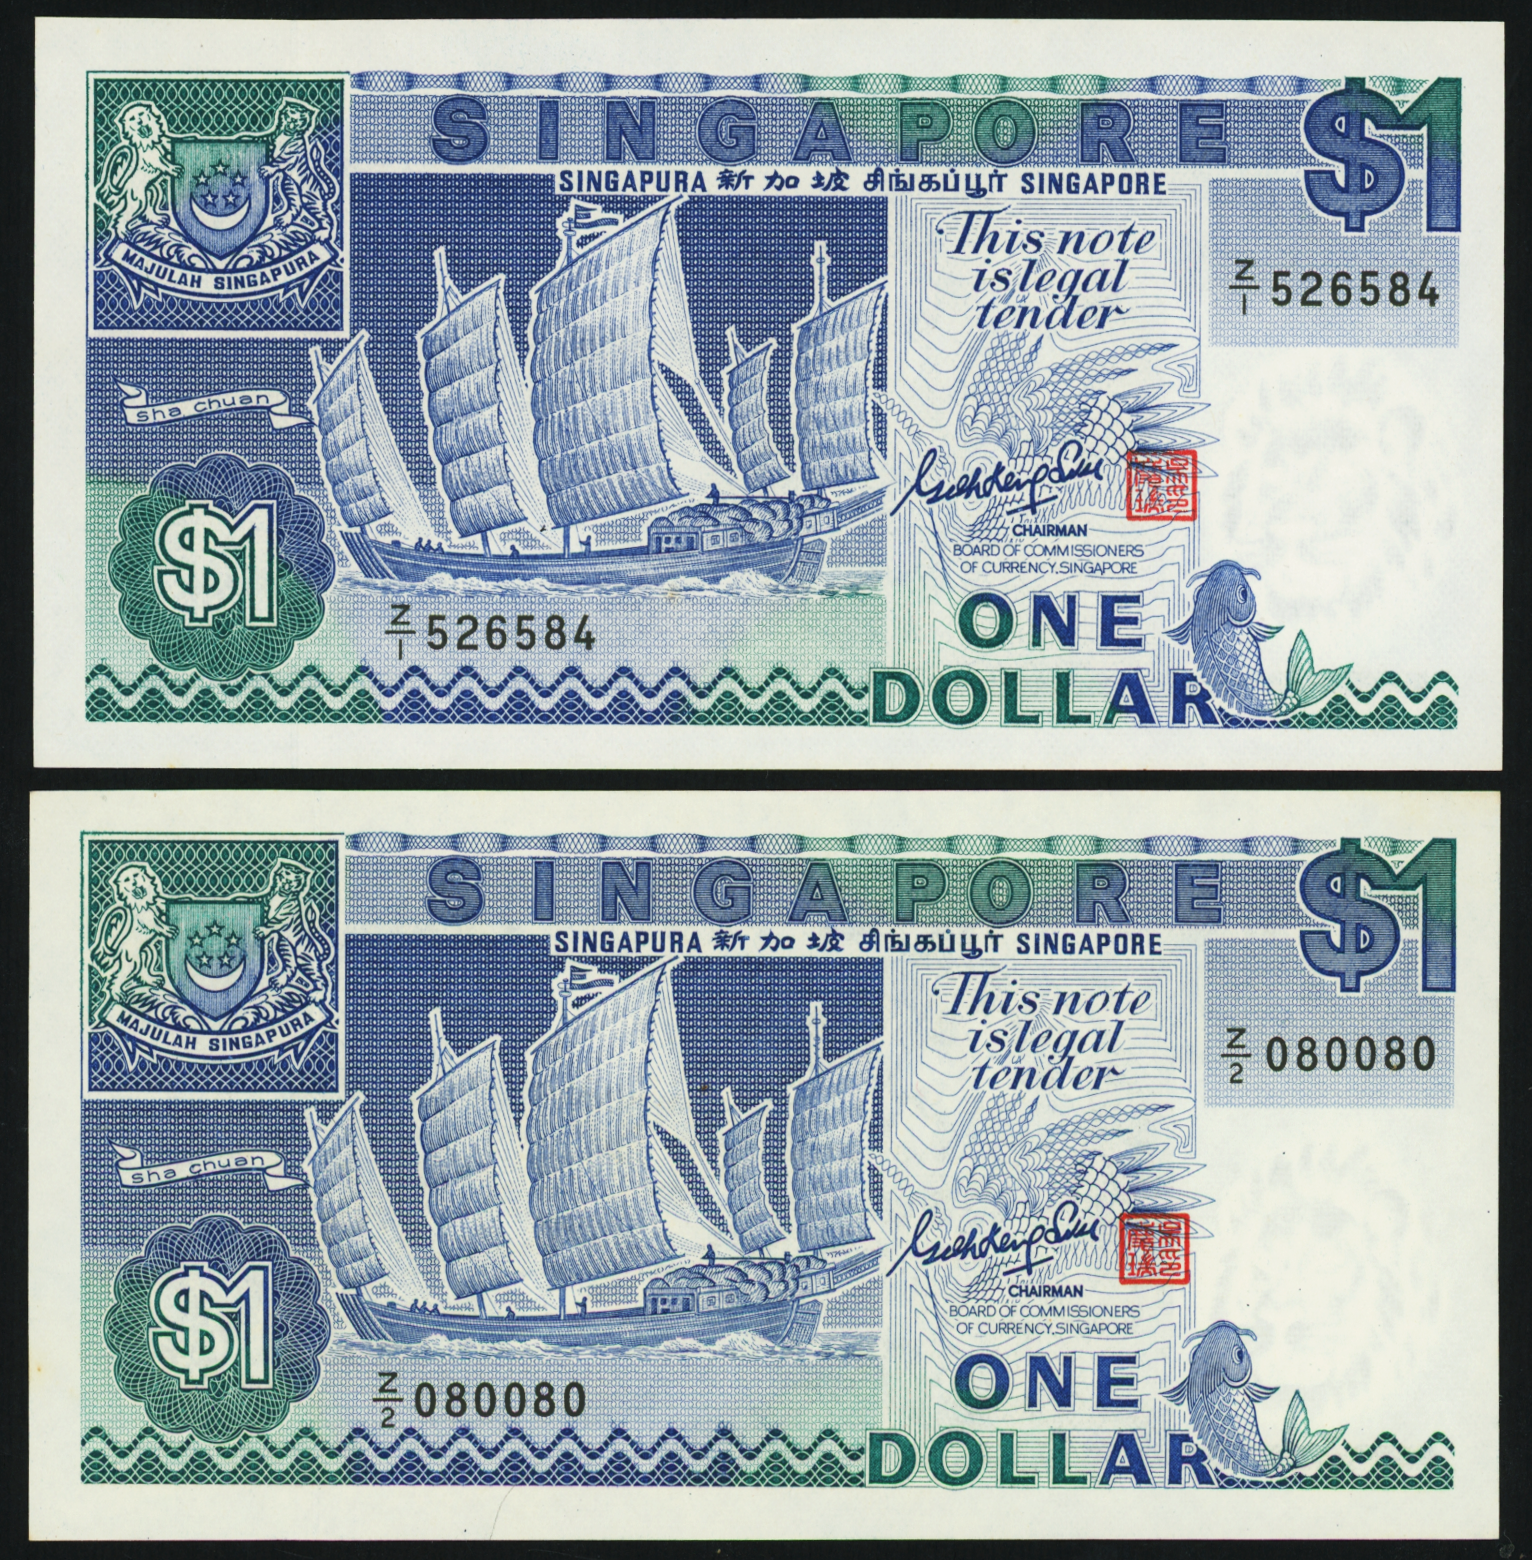 Singapore Ship 1985 $1 GKS Replacement Notes Z/1 526584 & Z/2 